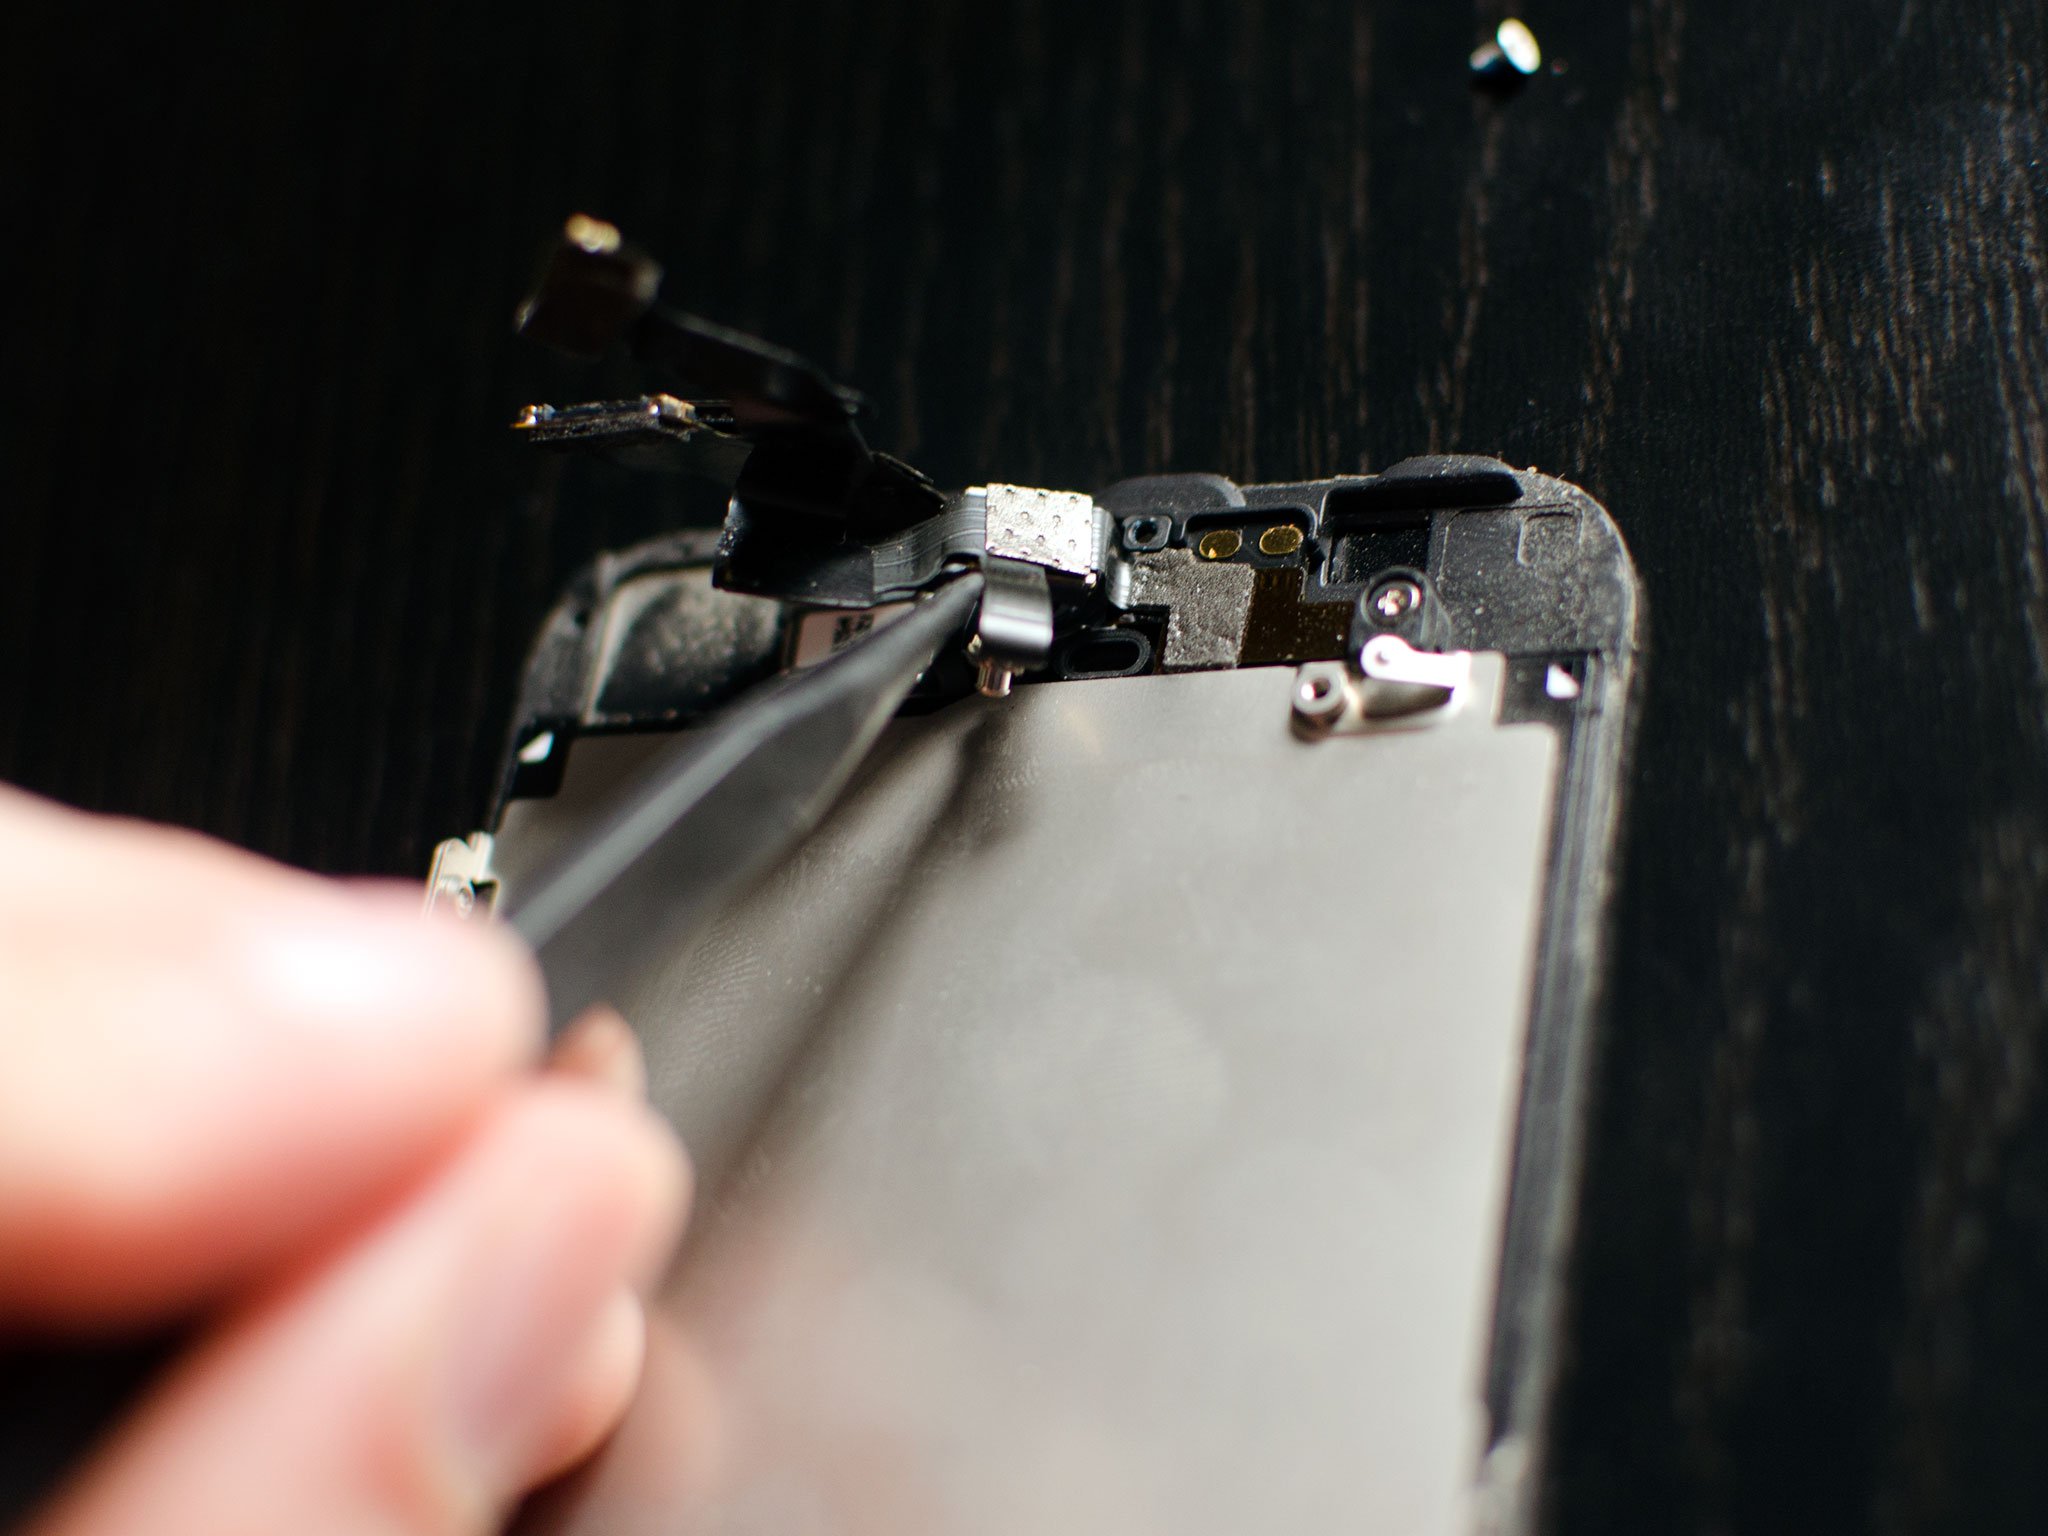 How to DIY replace the front-facing FaceTime camera and sensor cable on the iPhone 5